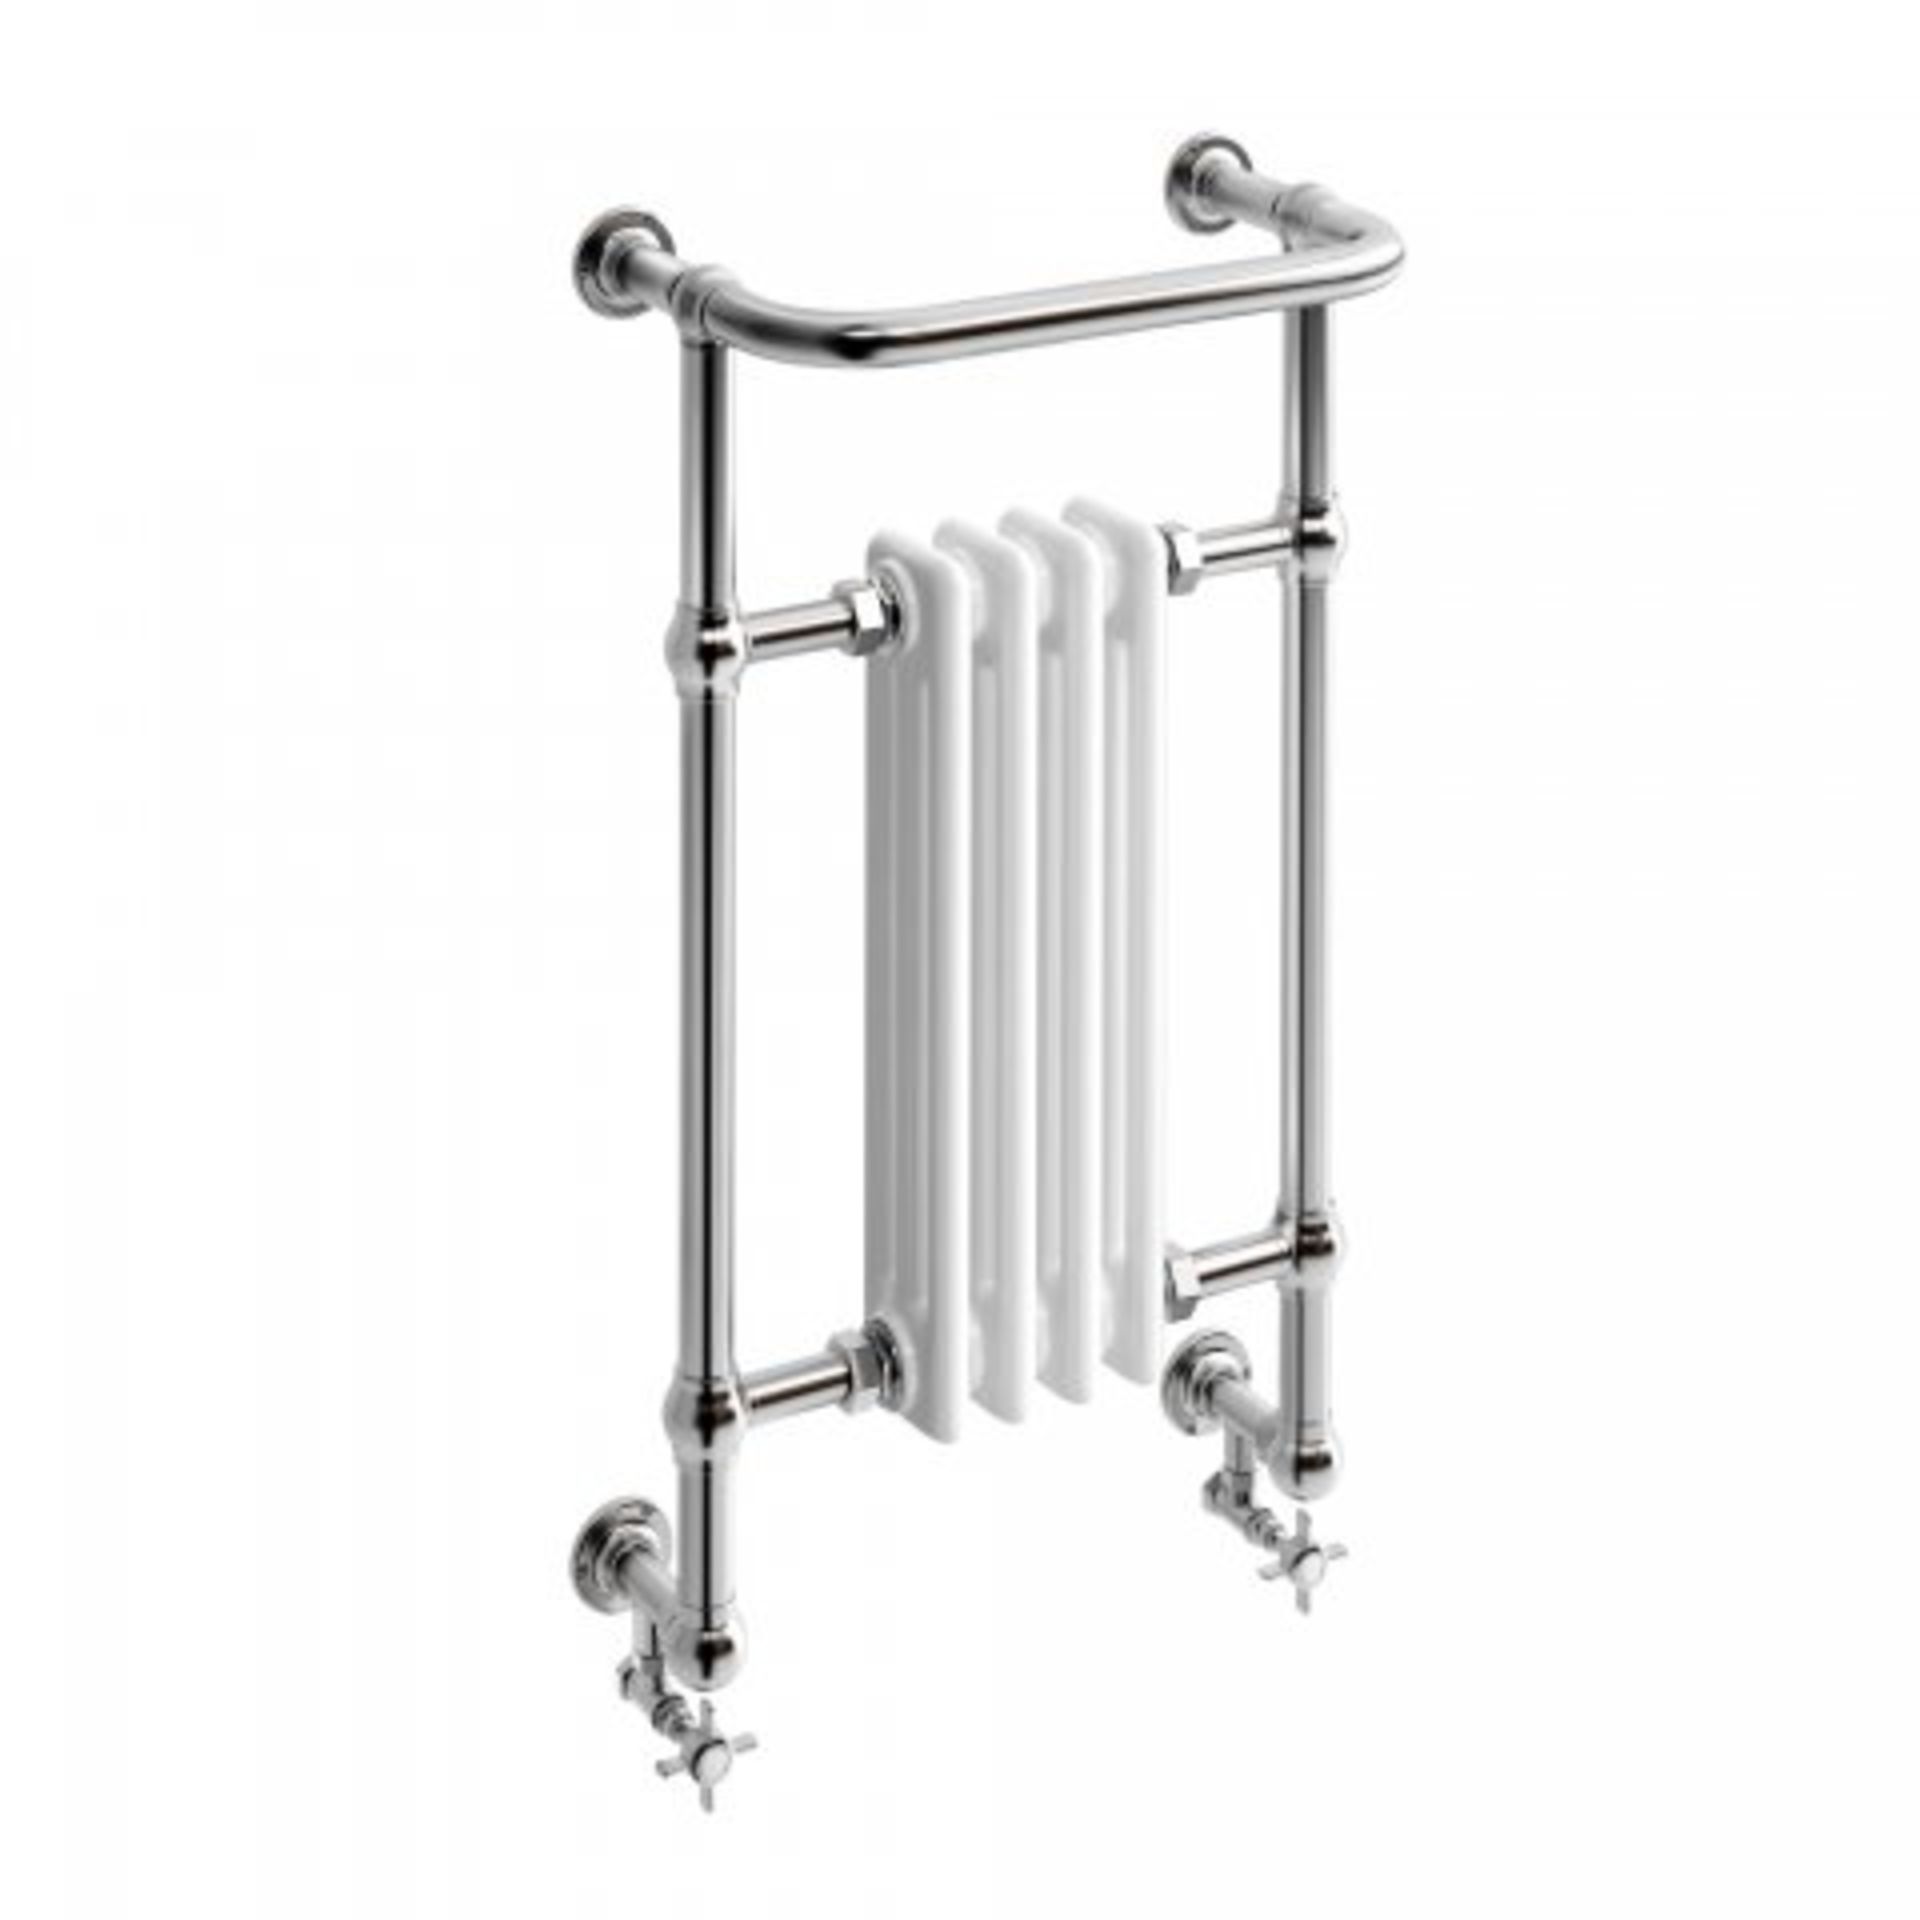 (REF7) 826x479mm Traditional White Wall Mounted Towel Rail Radiator - Victoria Premium. RRP £305.99. - Image 2 of 3